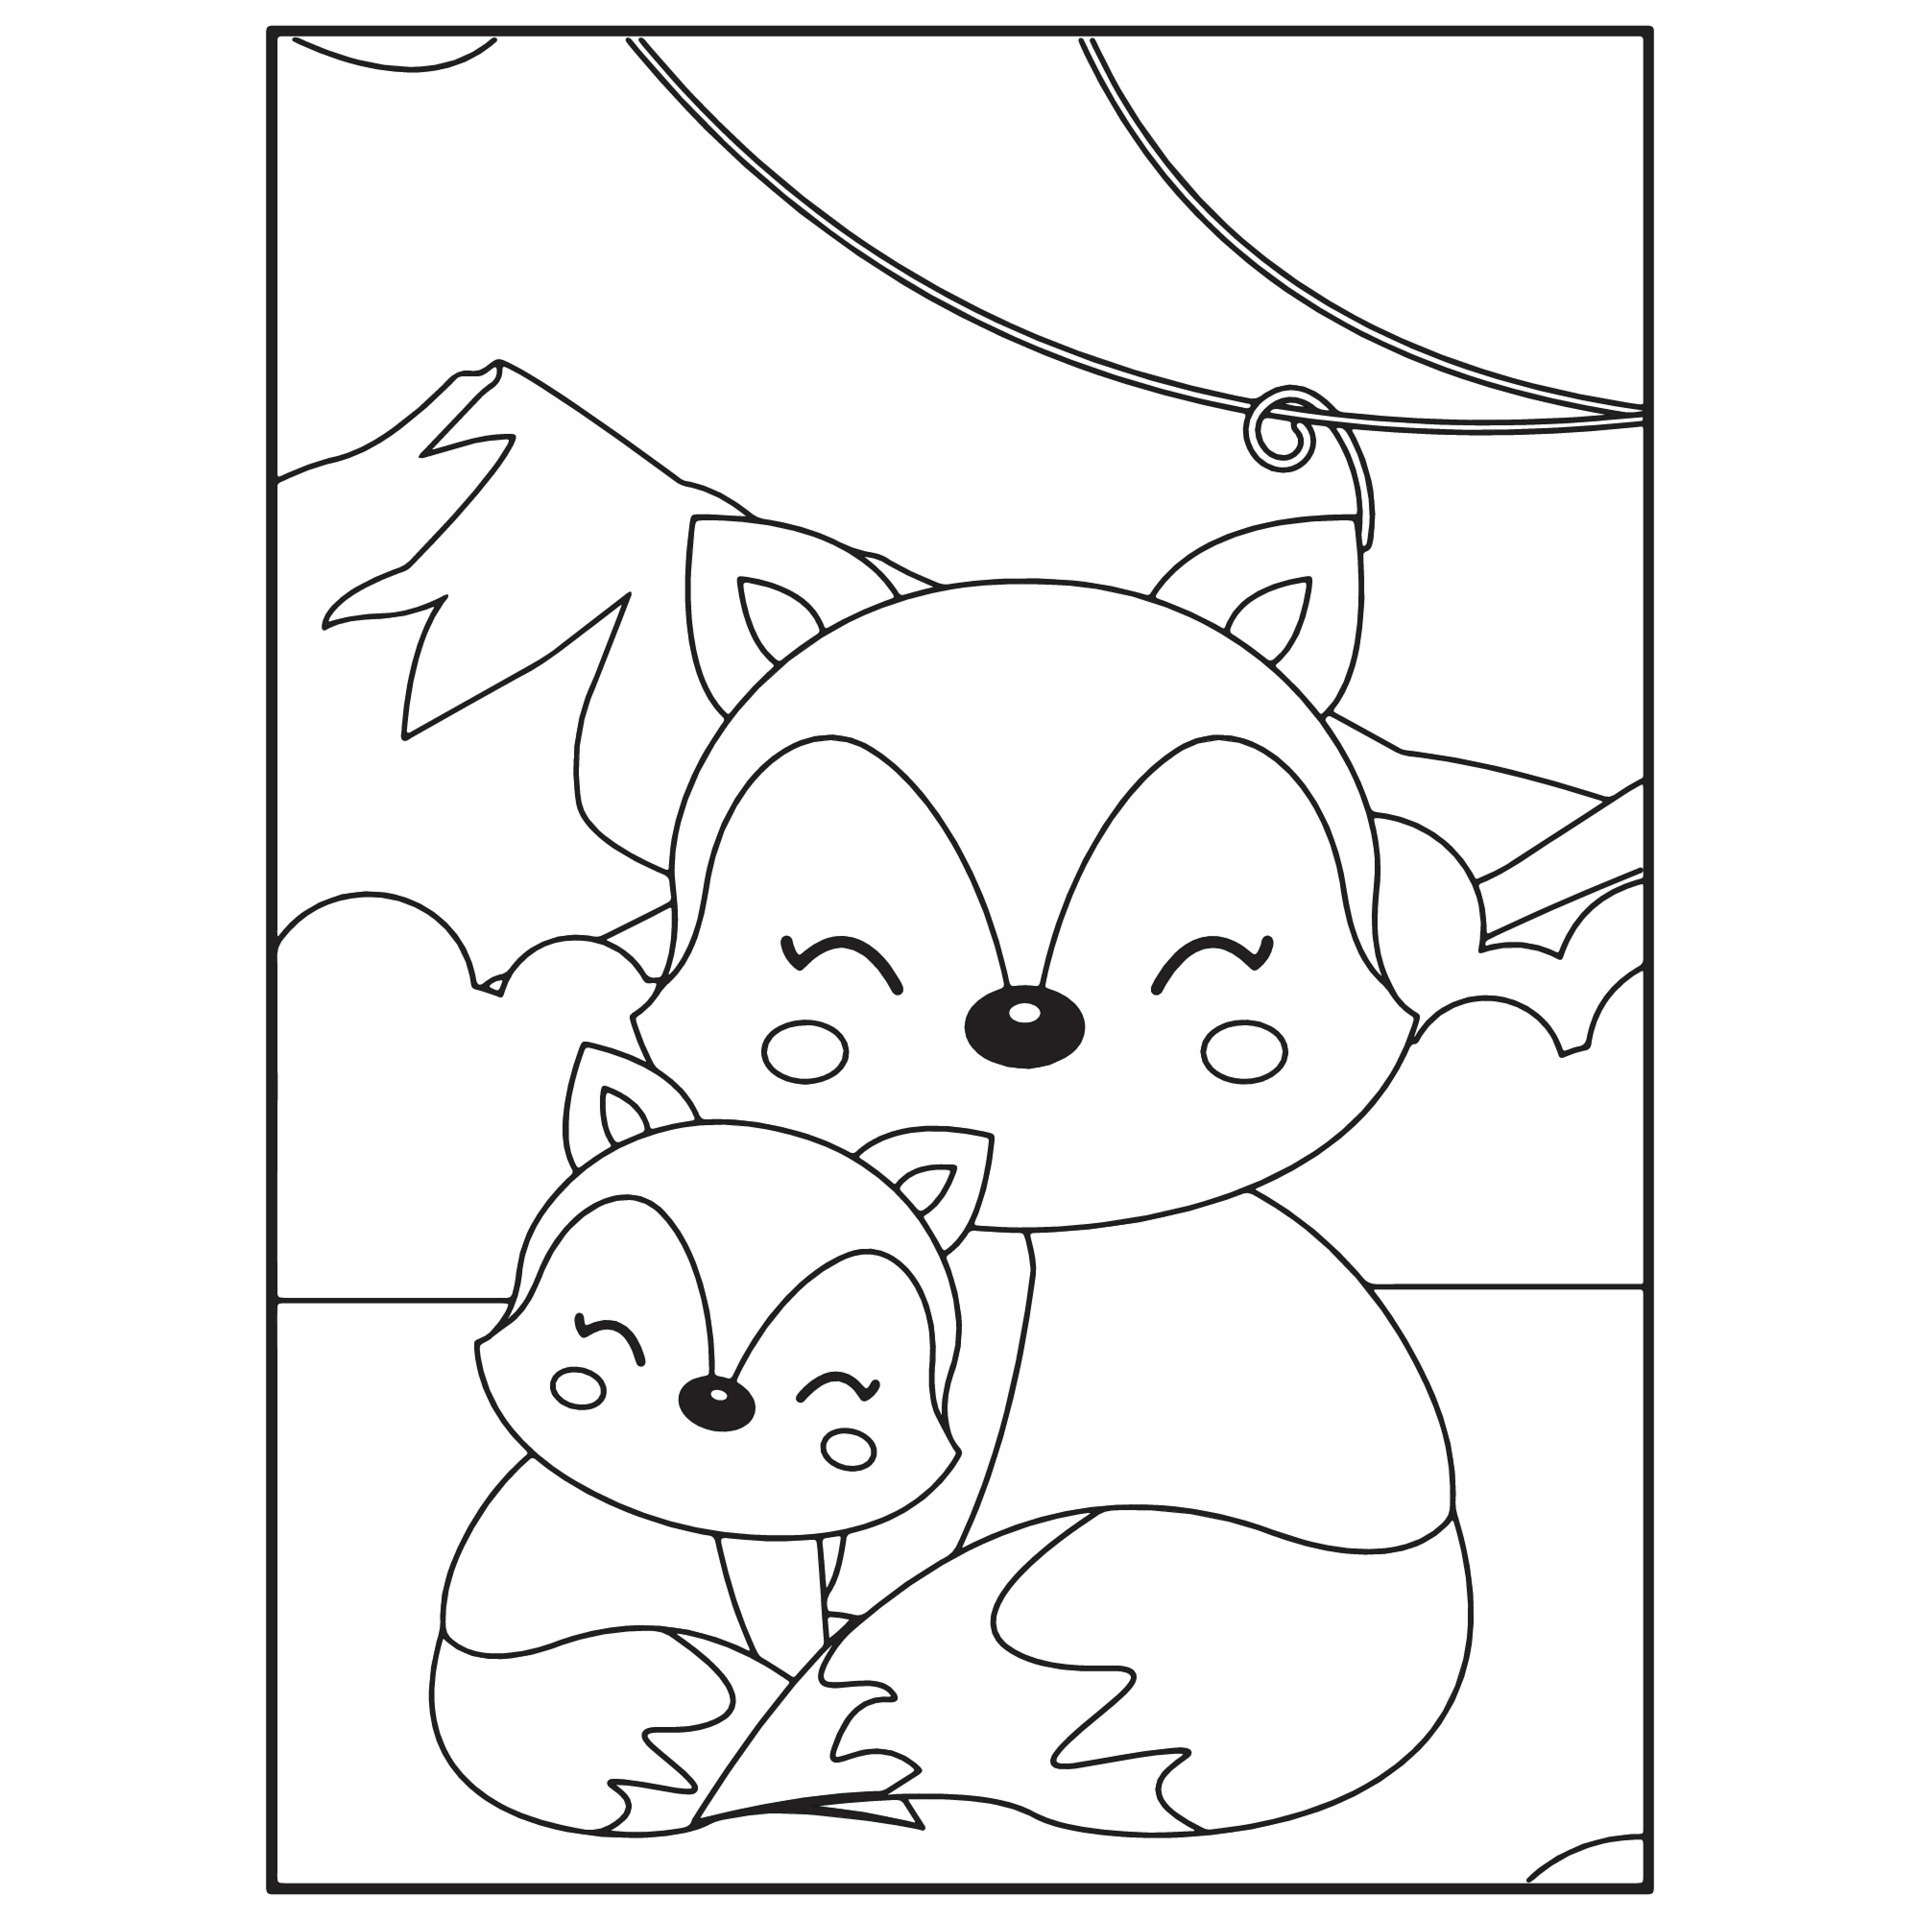 Free Baby Animal Coloring Pages & Printables